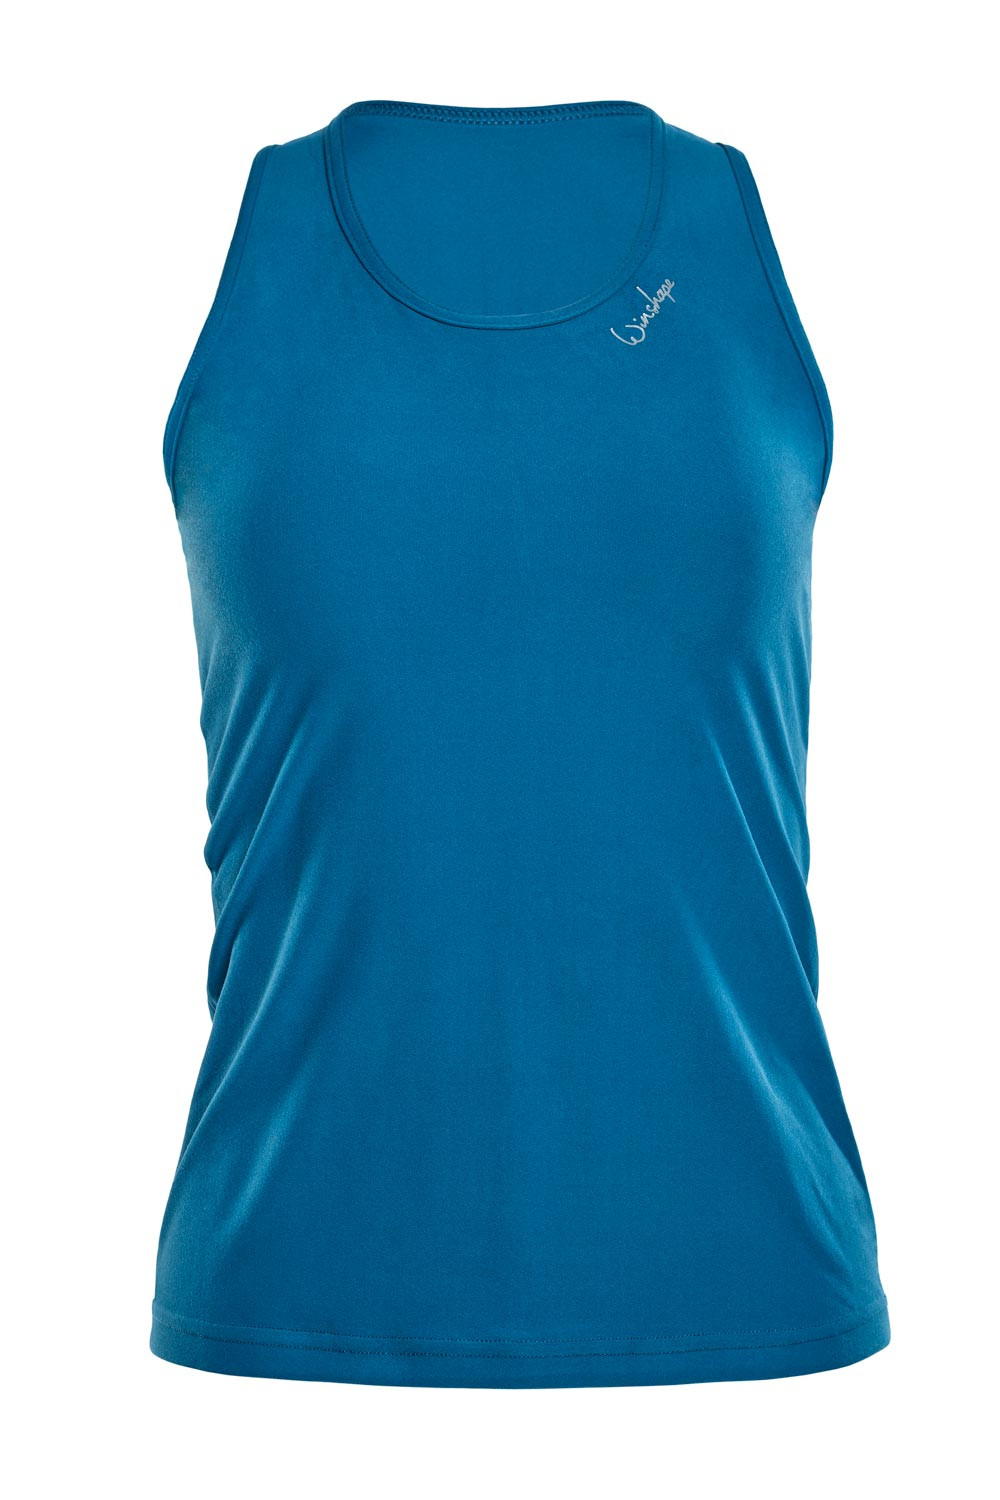 Functional Light green, Soft Soft teal AET124LS, Style Winshape Tanktop Ultra and